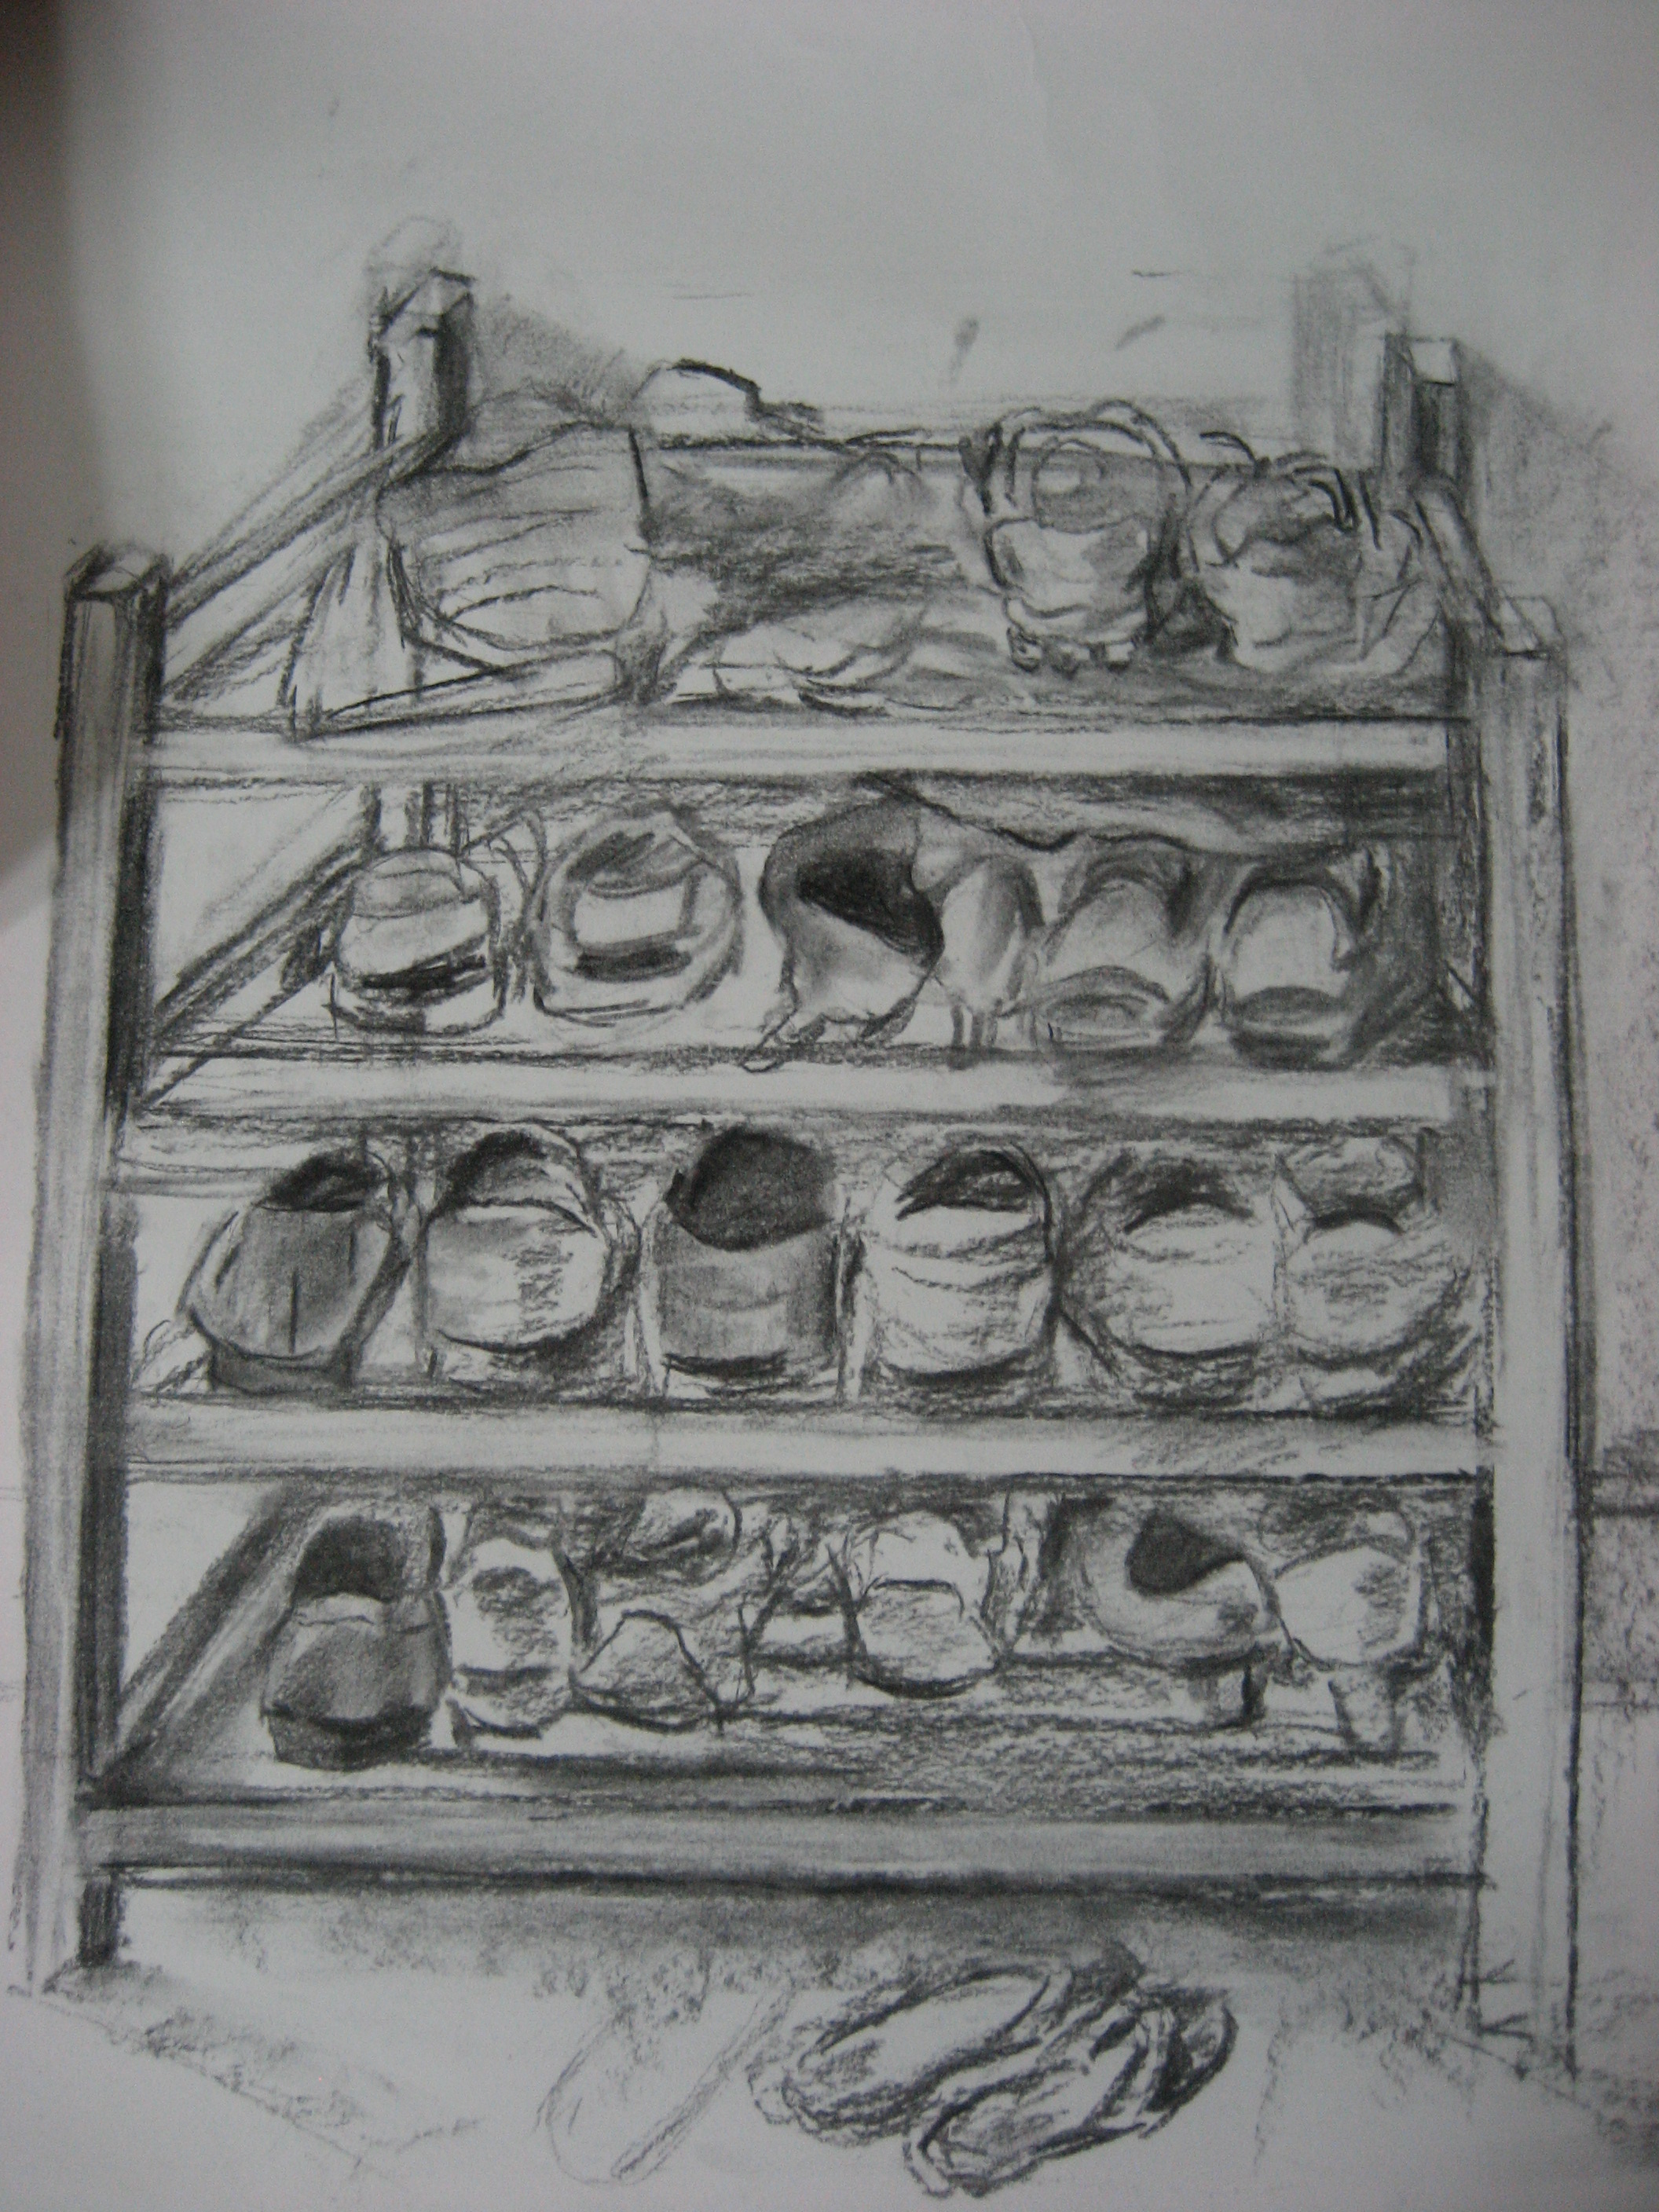 FileShoe rack line art PSF R750010 croppedpng  Wikimedia Commons